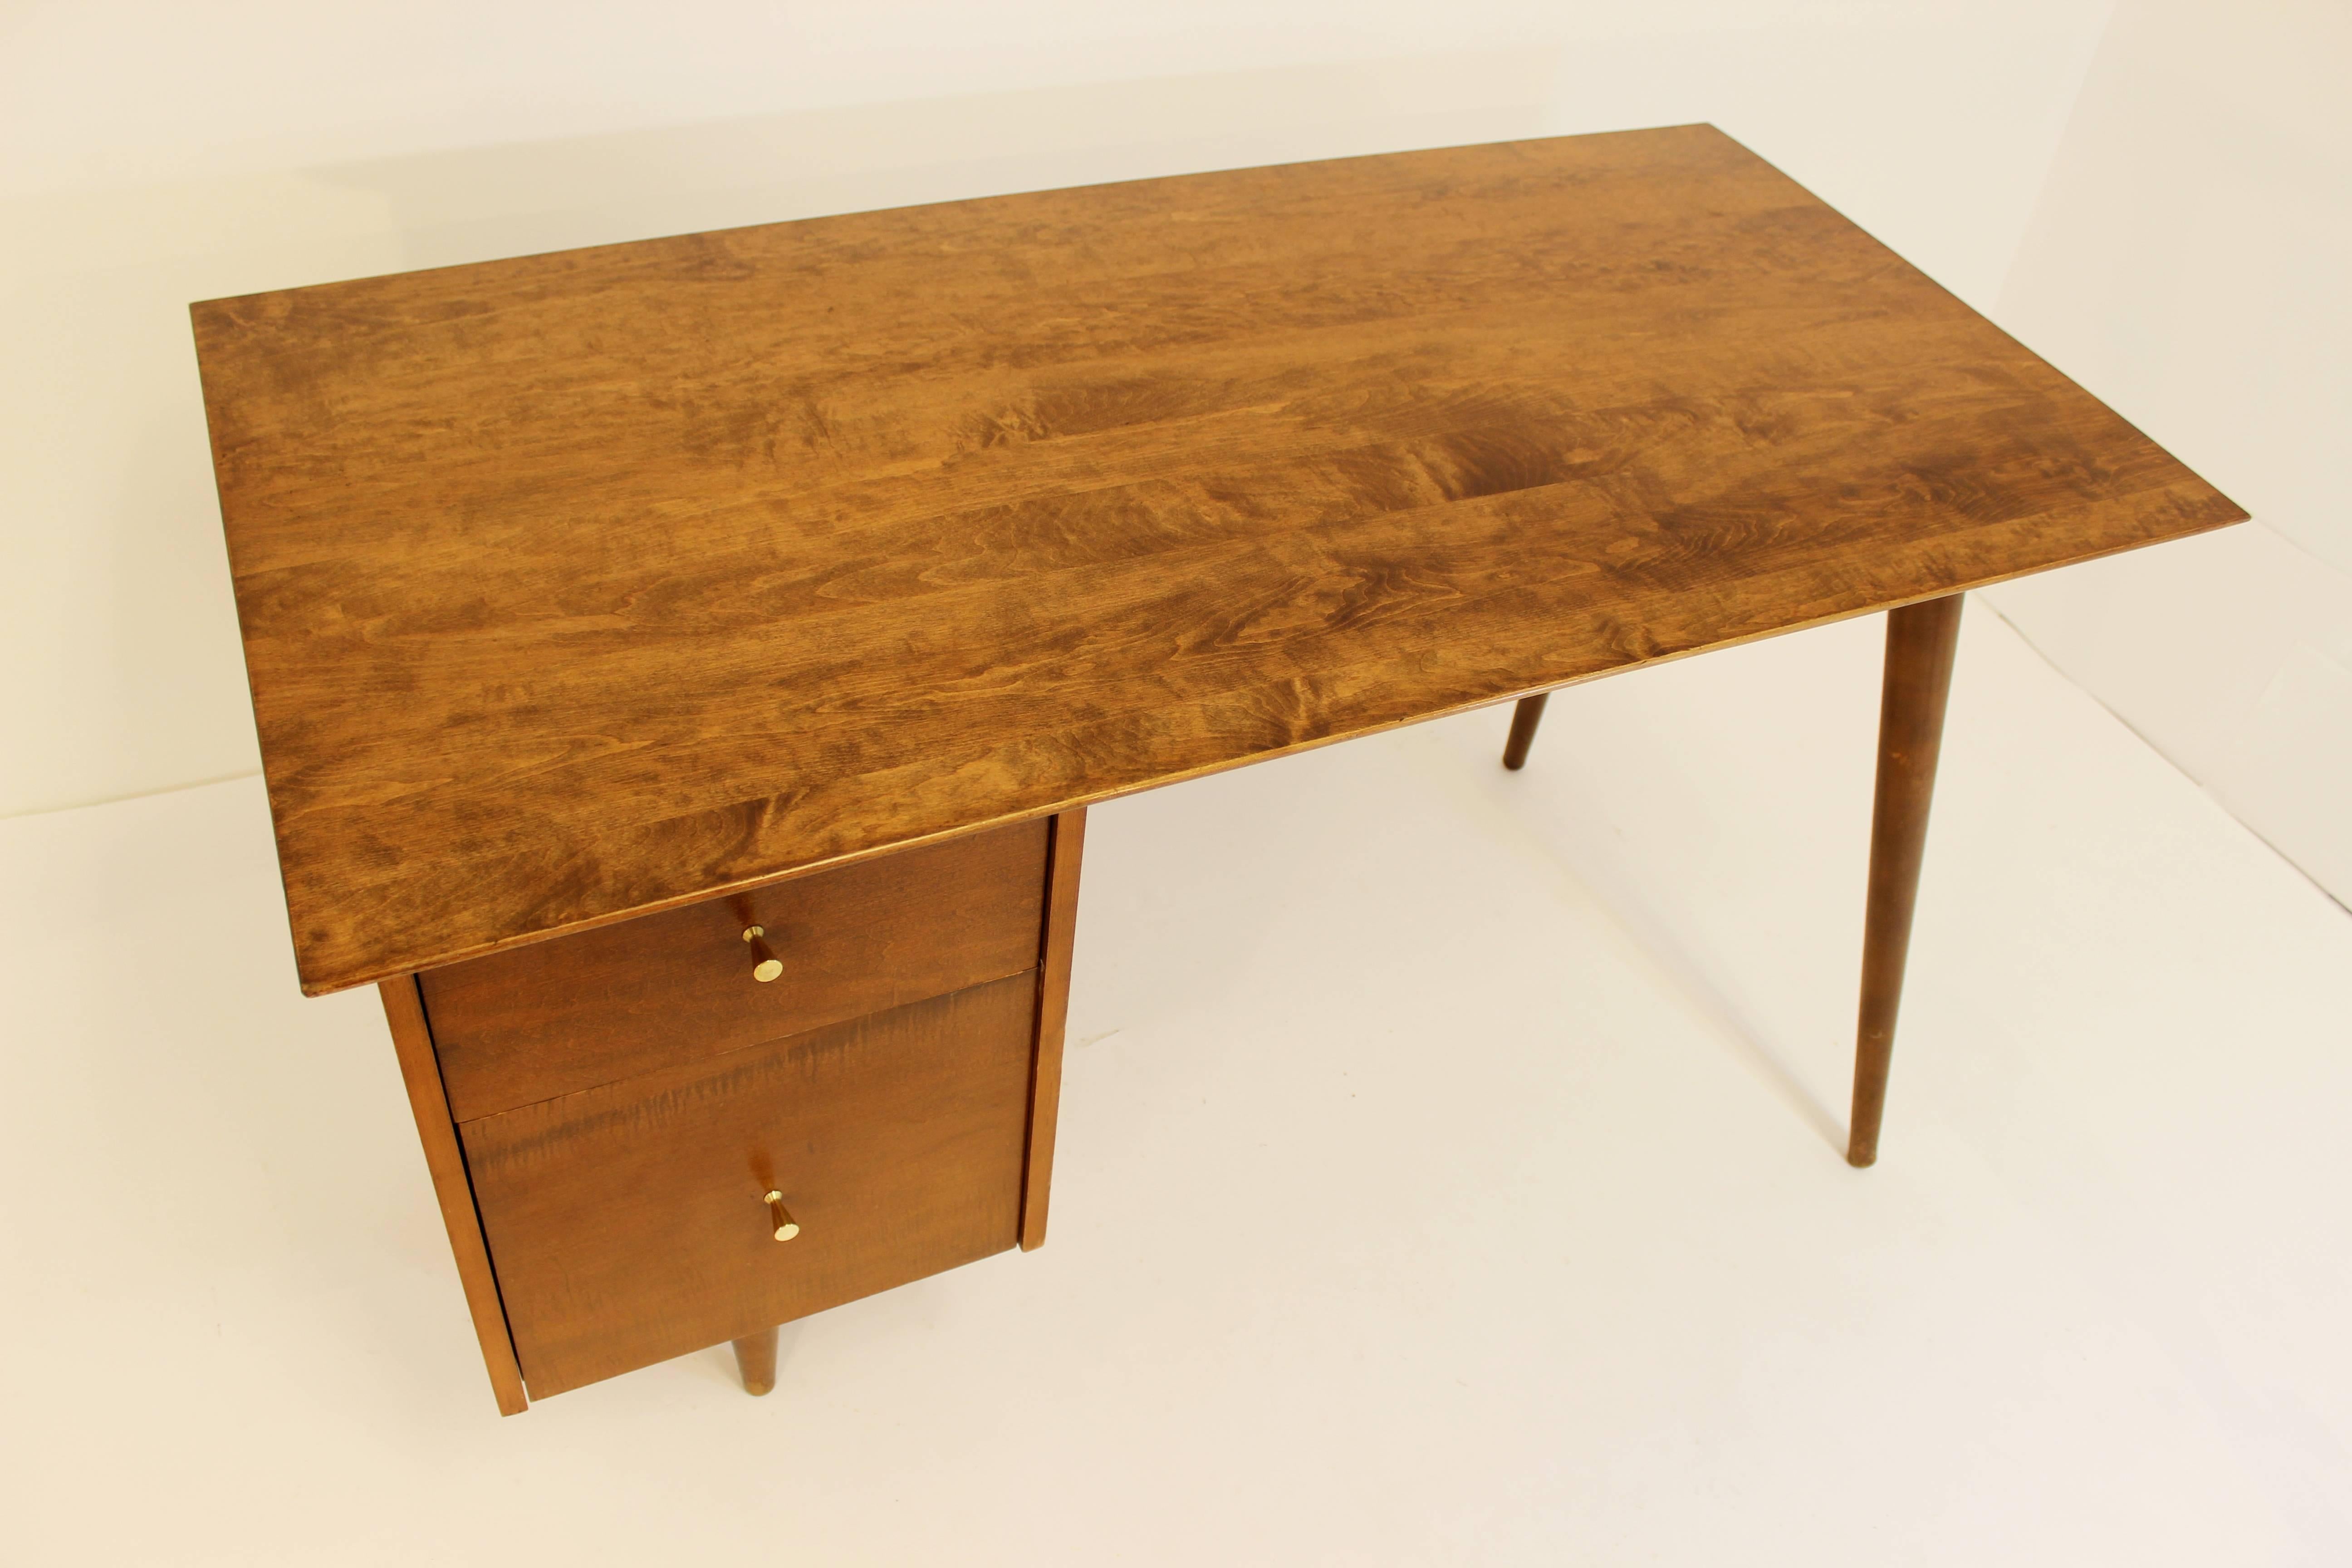 Paul McCobb planner group desk for Winchendon in Maple. Measures in at 29